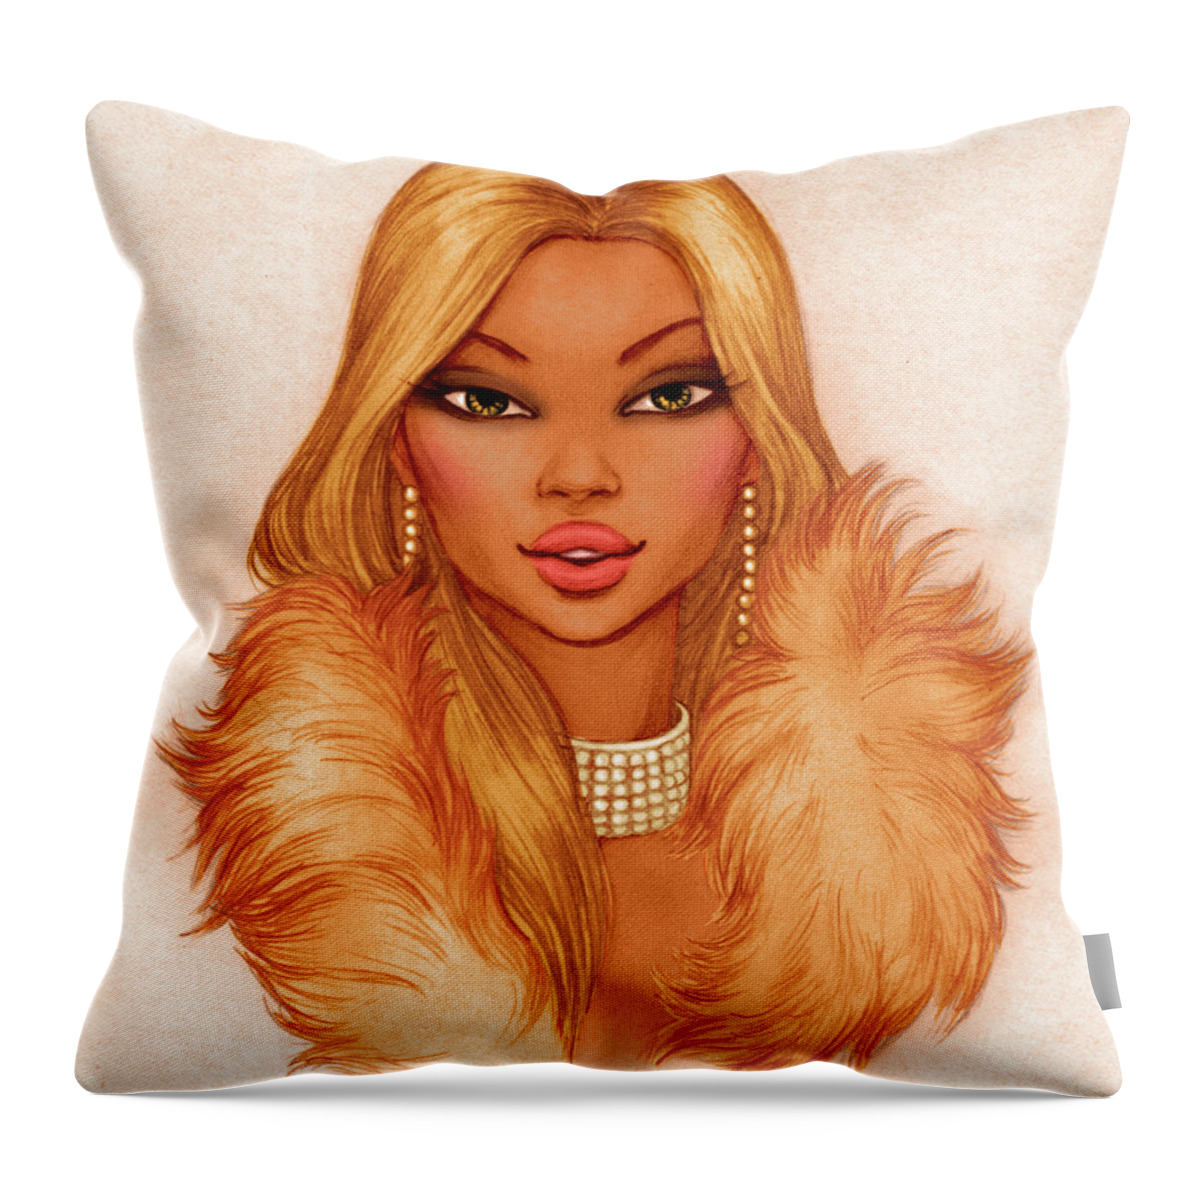 People Throw Pillow featuring the digital art Glamour Girl Portrait Blond by Tatarnikova